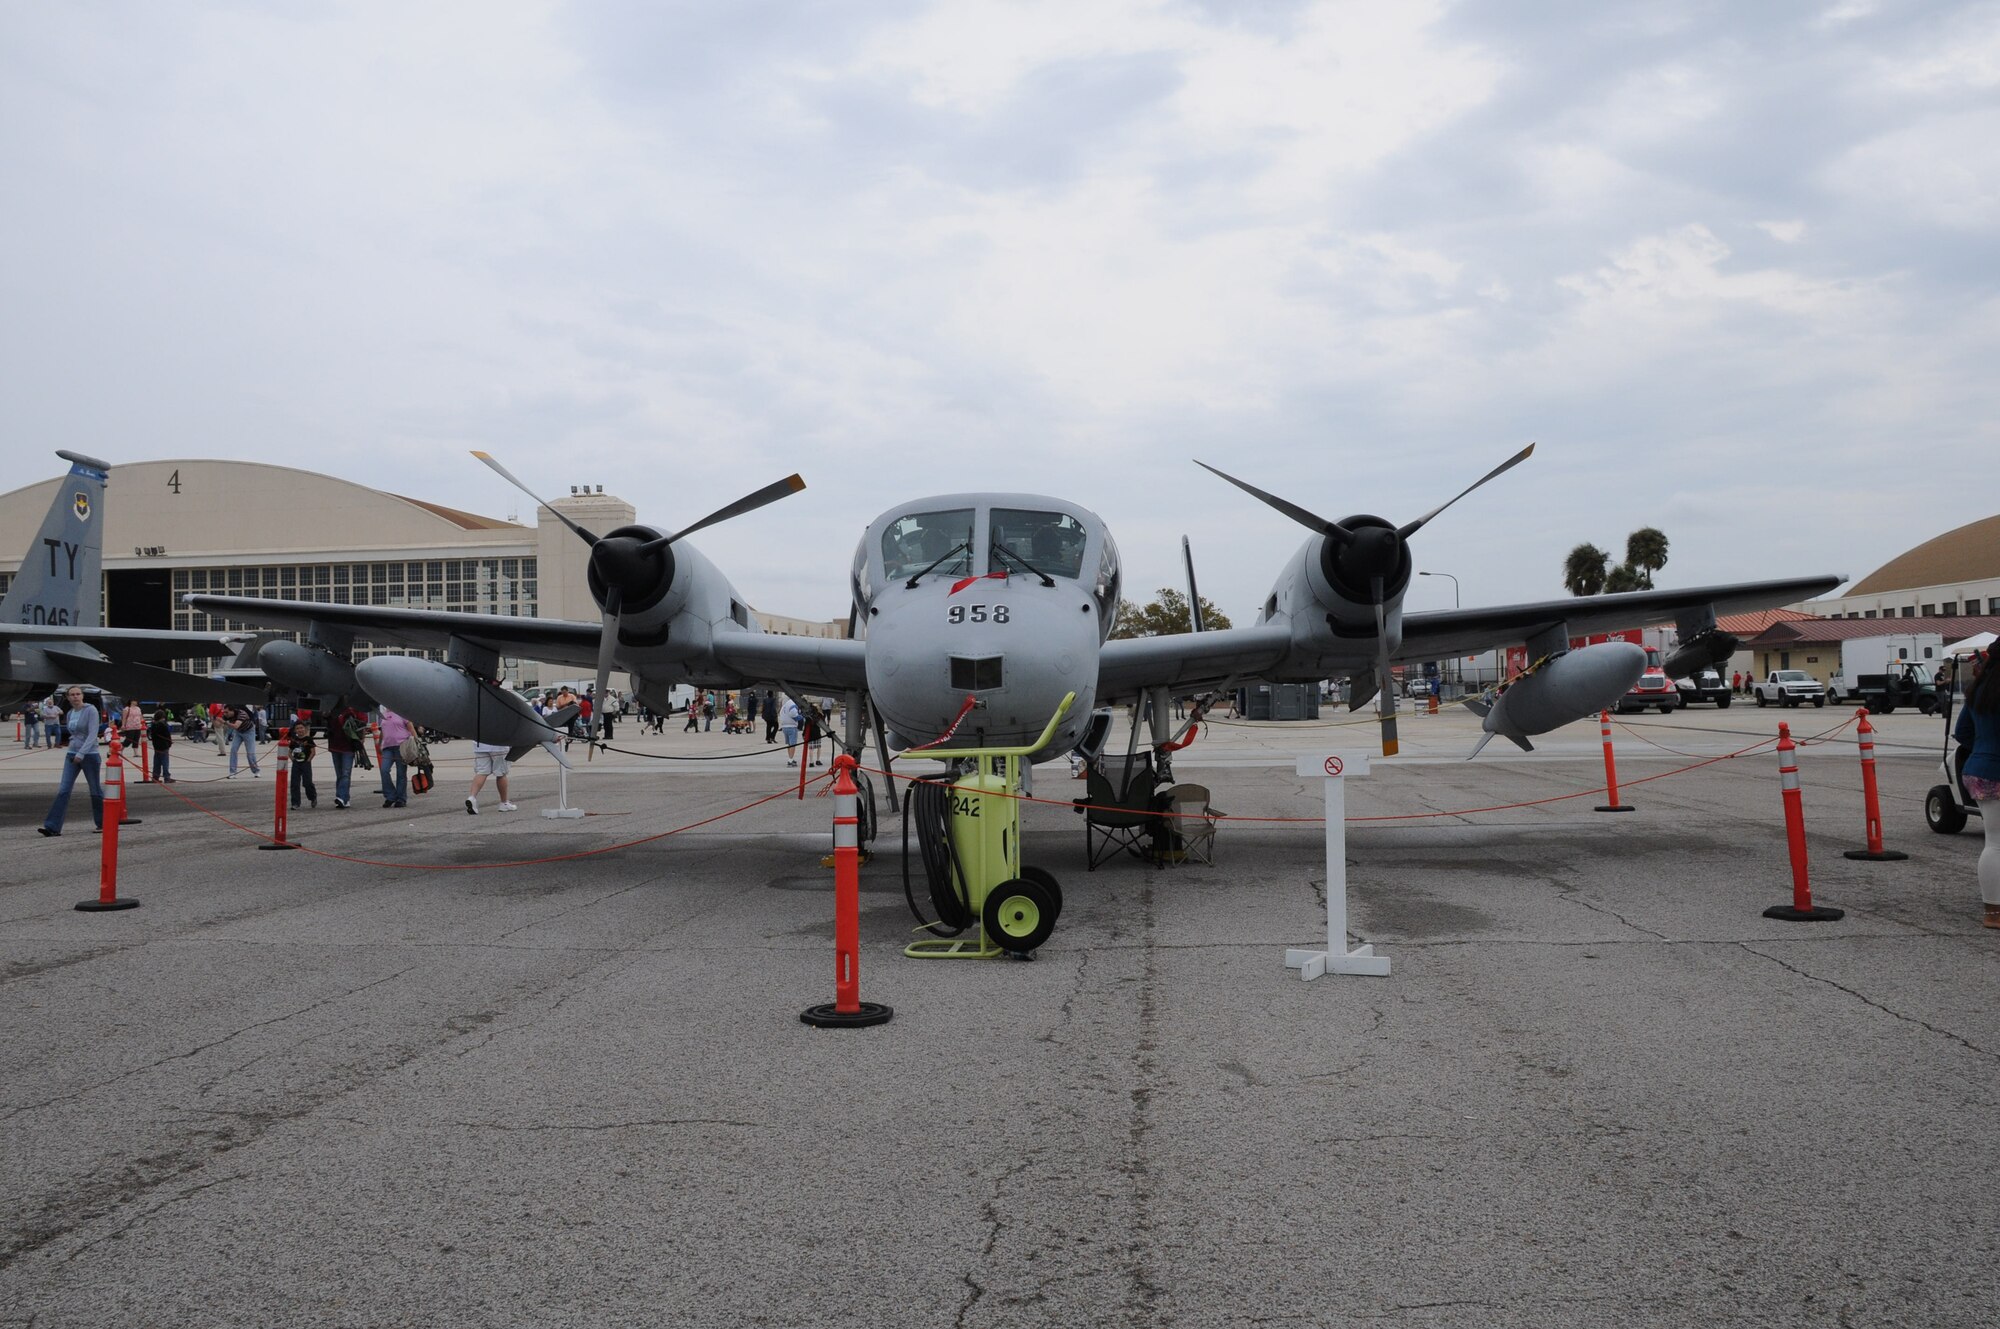 The OV-1 Mohawk aircraft was showcased at Airfest, MacDill Air Force Base's annual air show, March 20-21, 2010. This twin turboprop aircraft is one of only 15 flyable Mohawks worldwide.